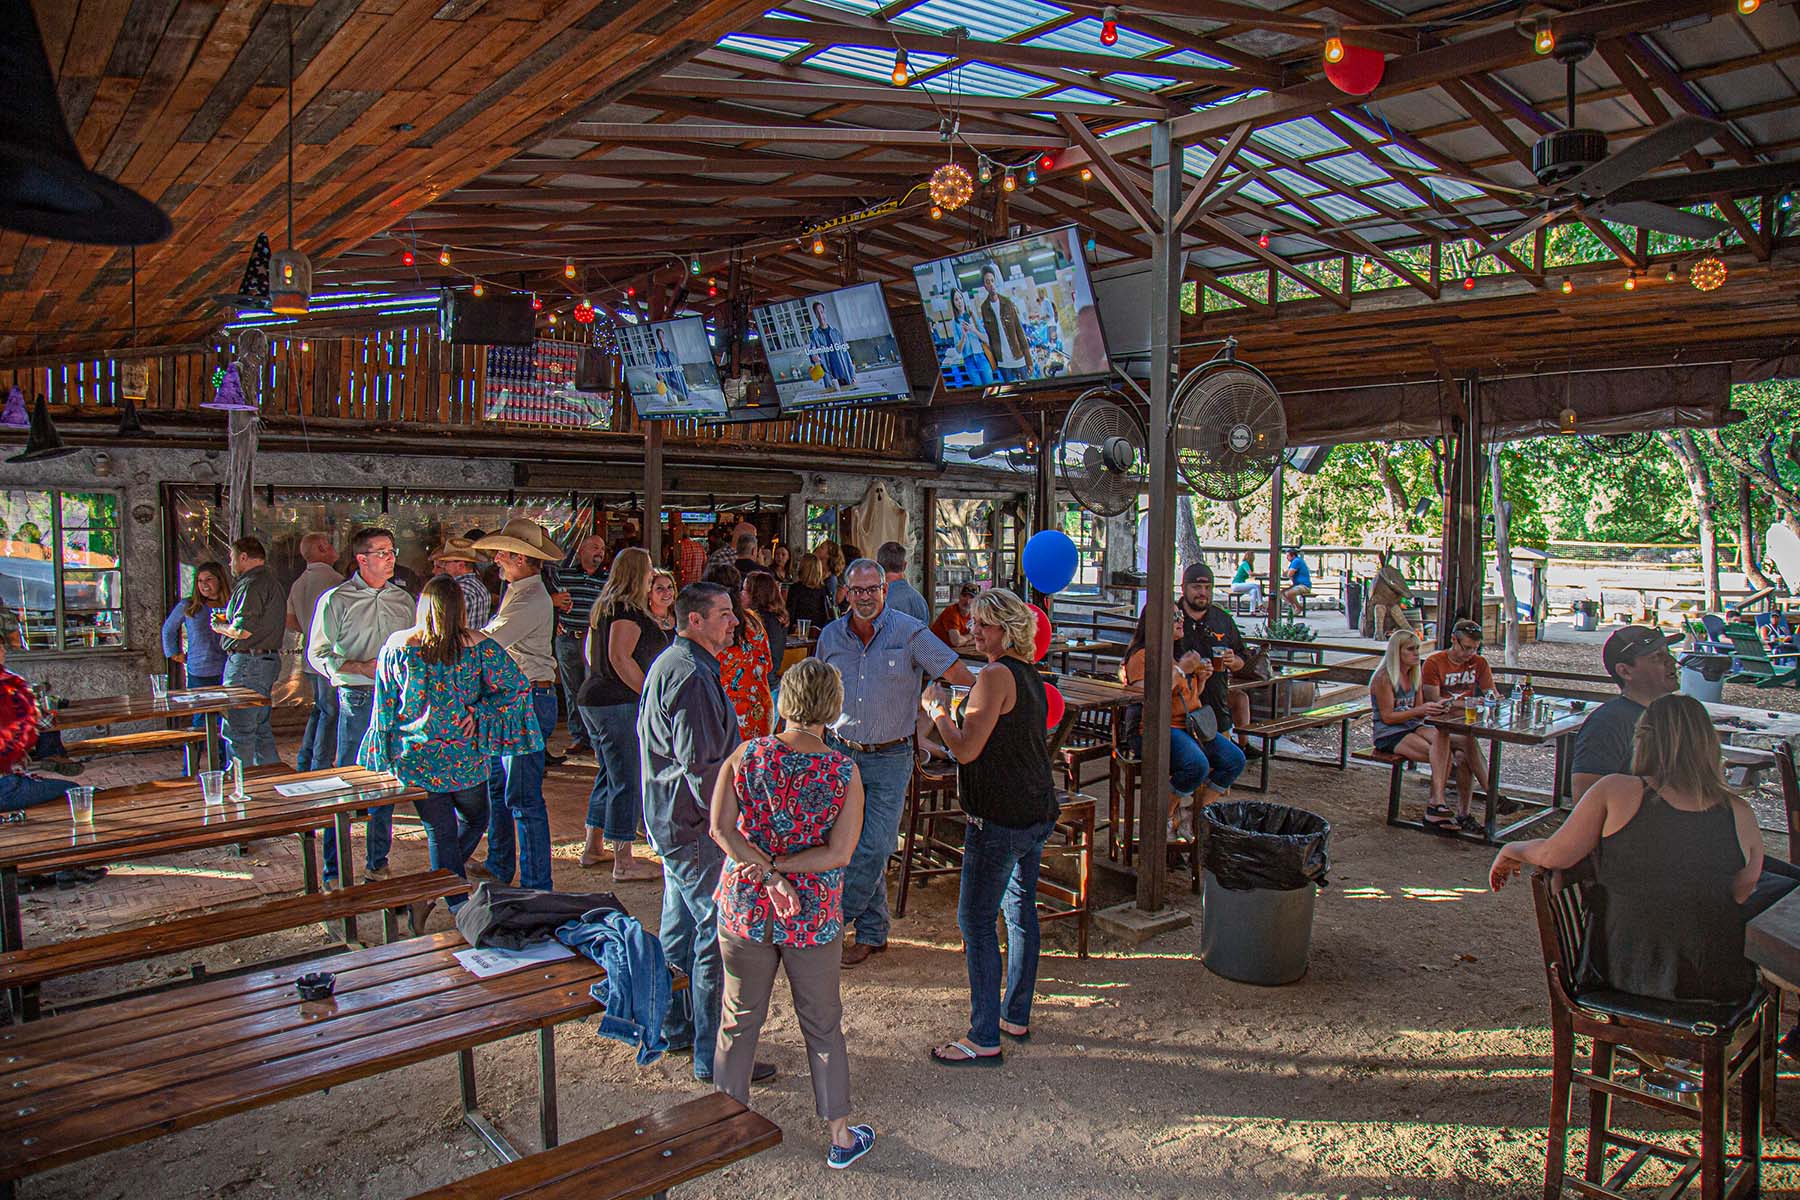 Converted ranch house on 11 big acres with patio bars, volleyball courts, live music. Photo: Will Taylor - LostinAustin.org